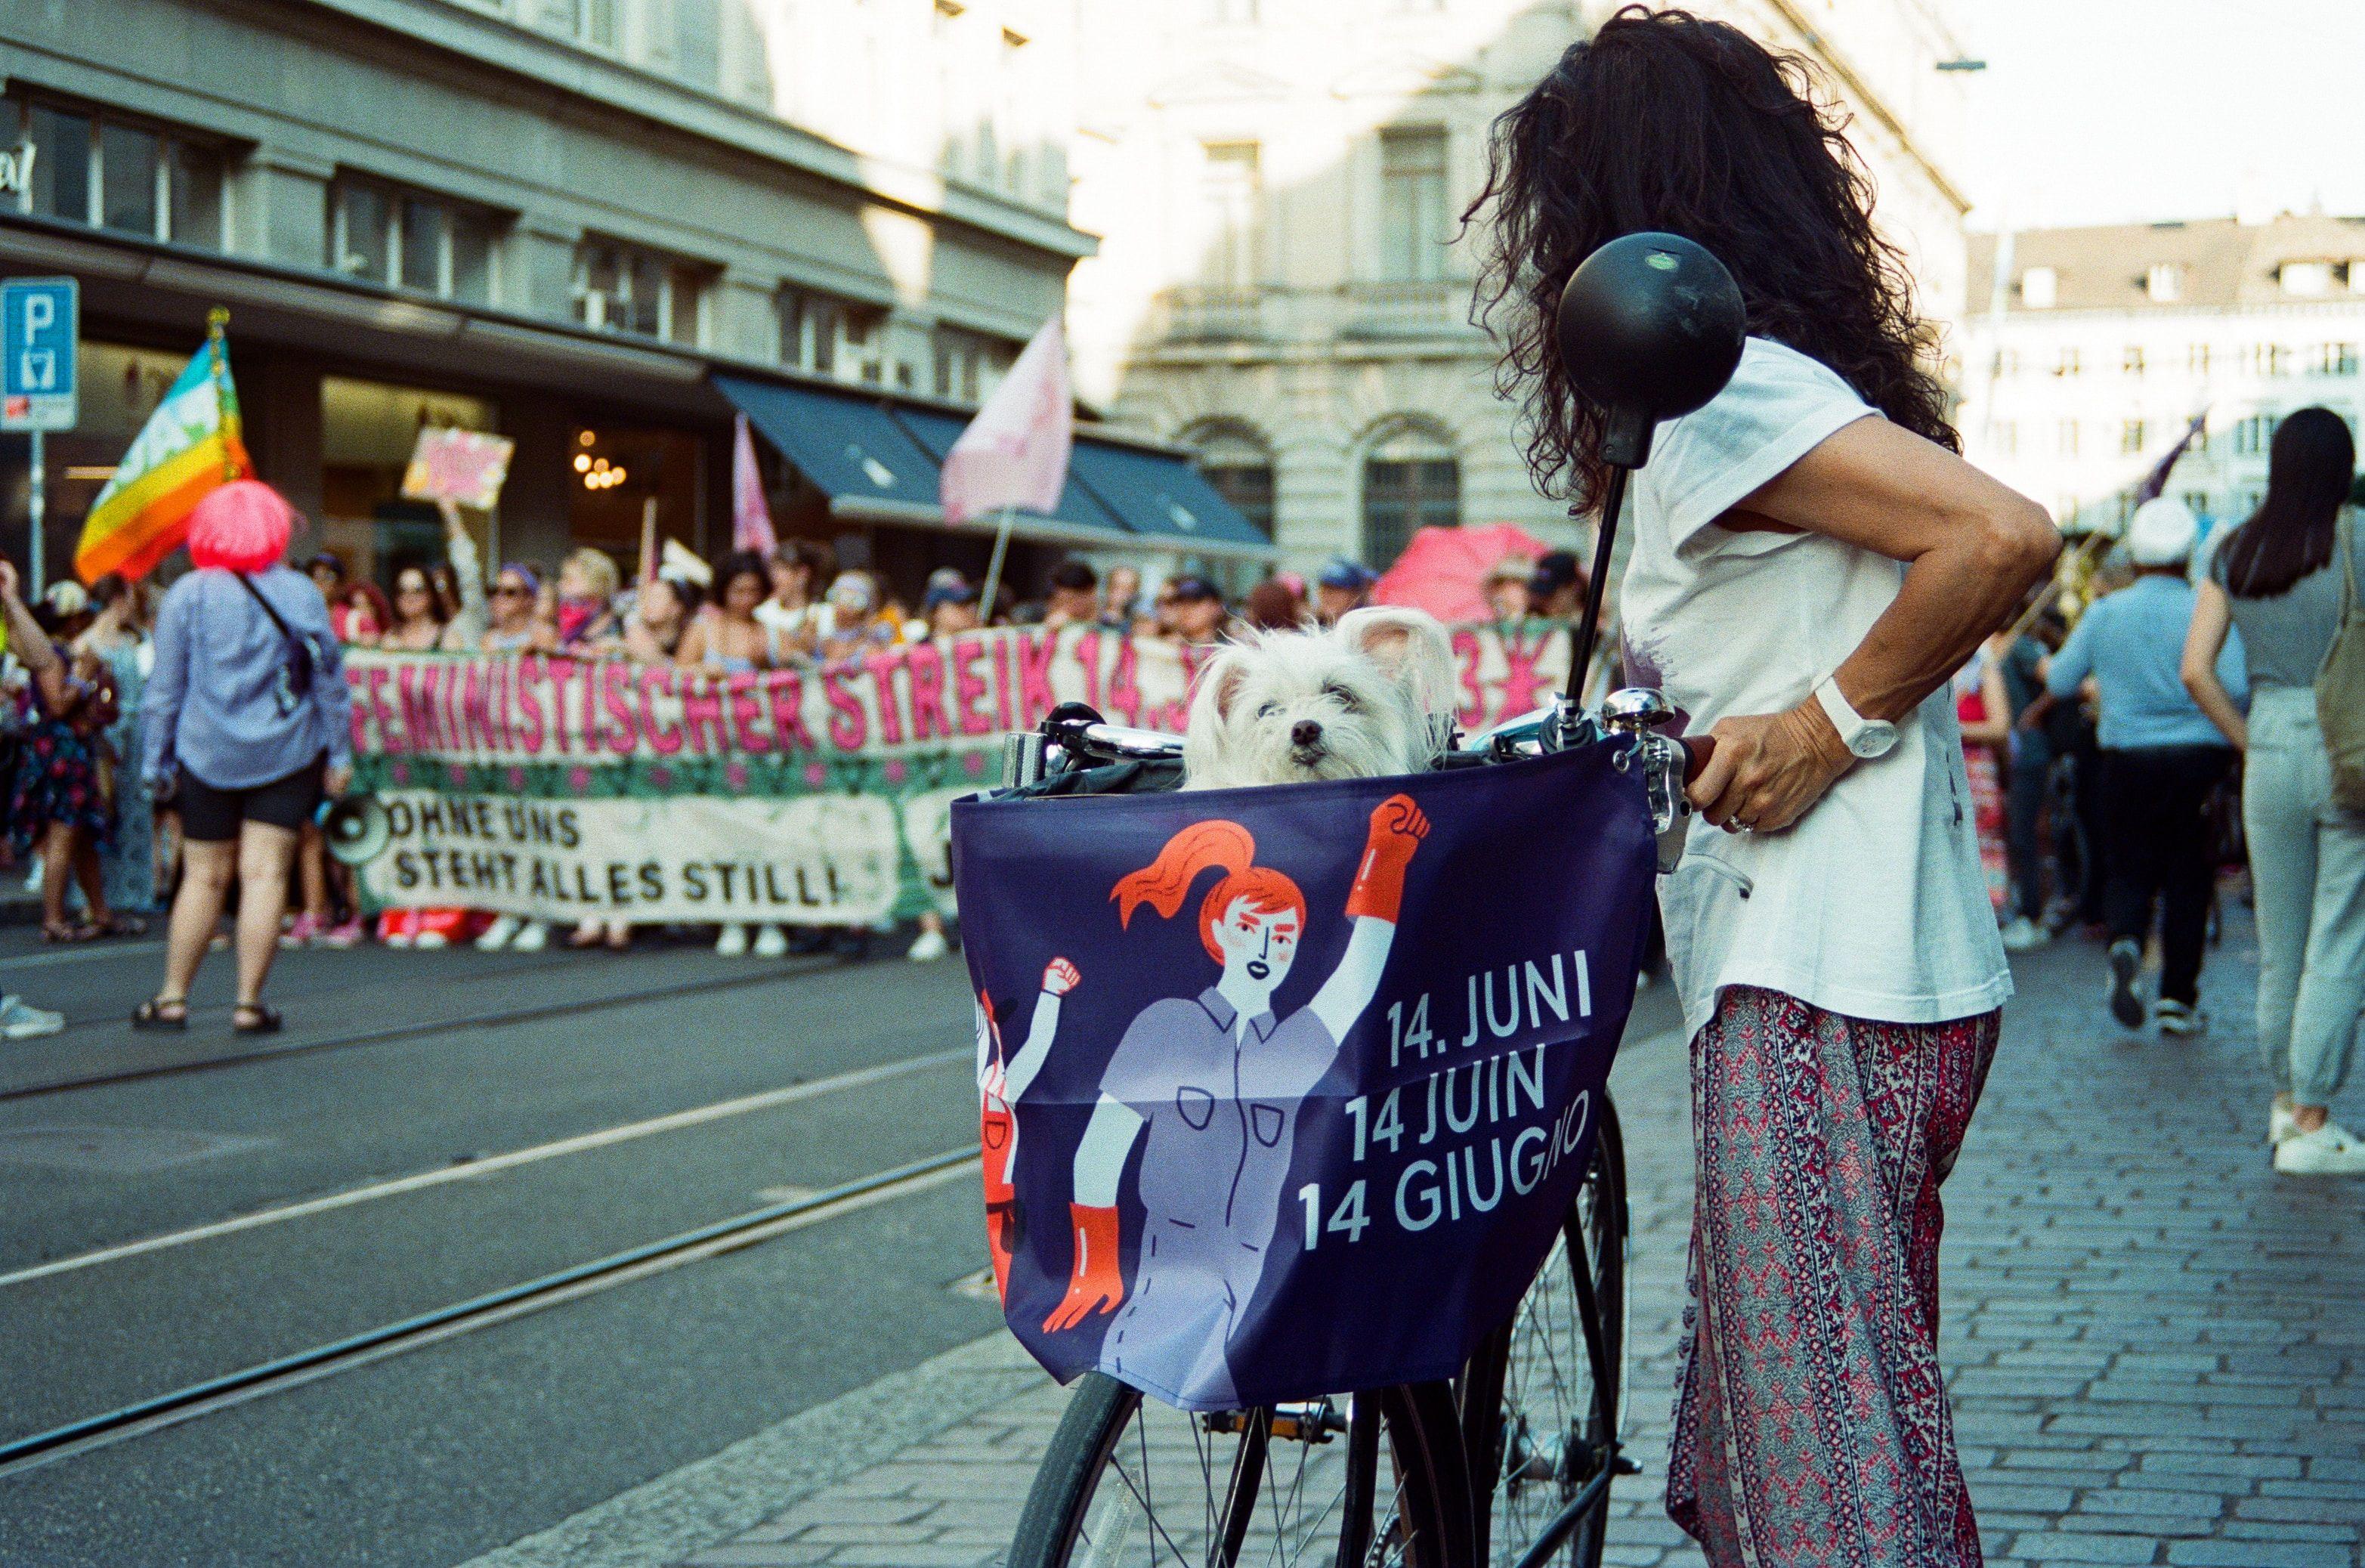 A woman is standing next to a demonstration and is holding her bycycle.